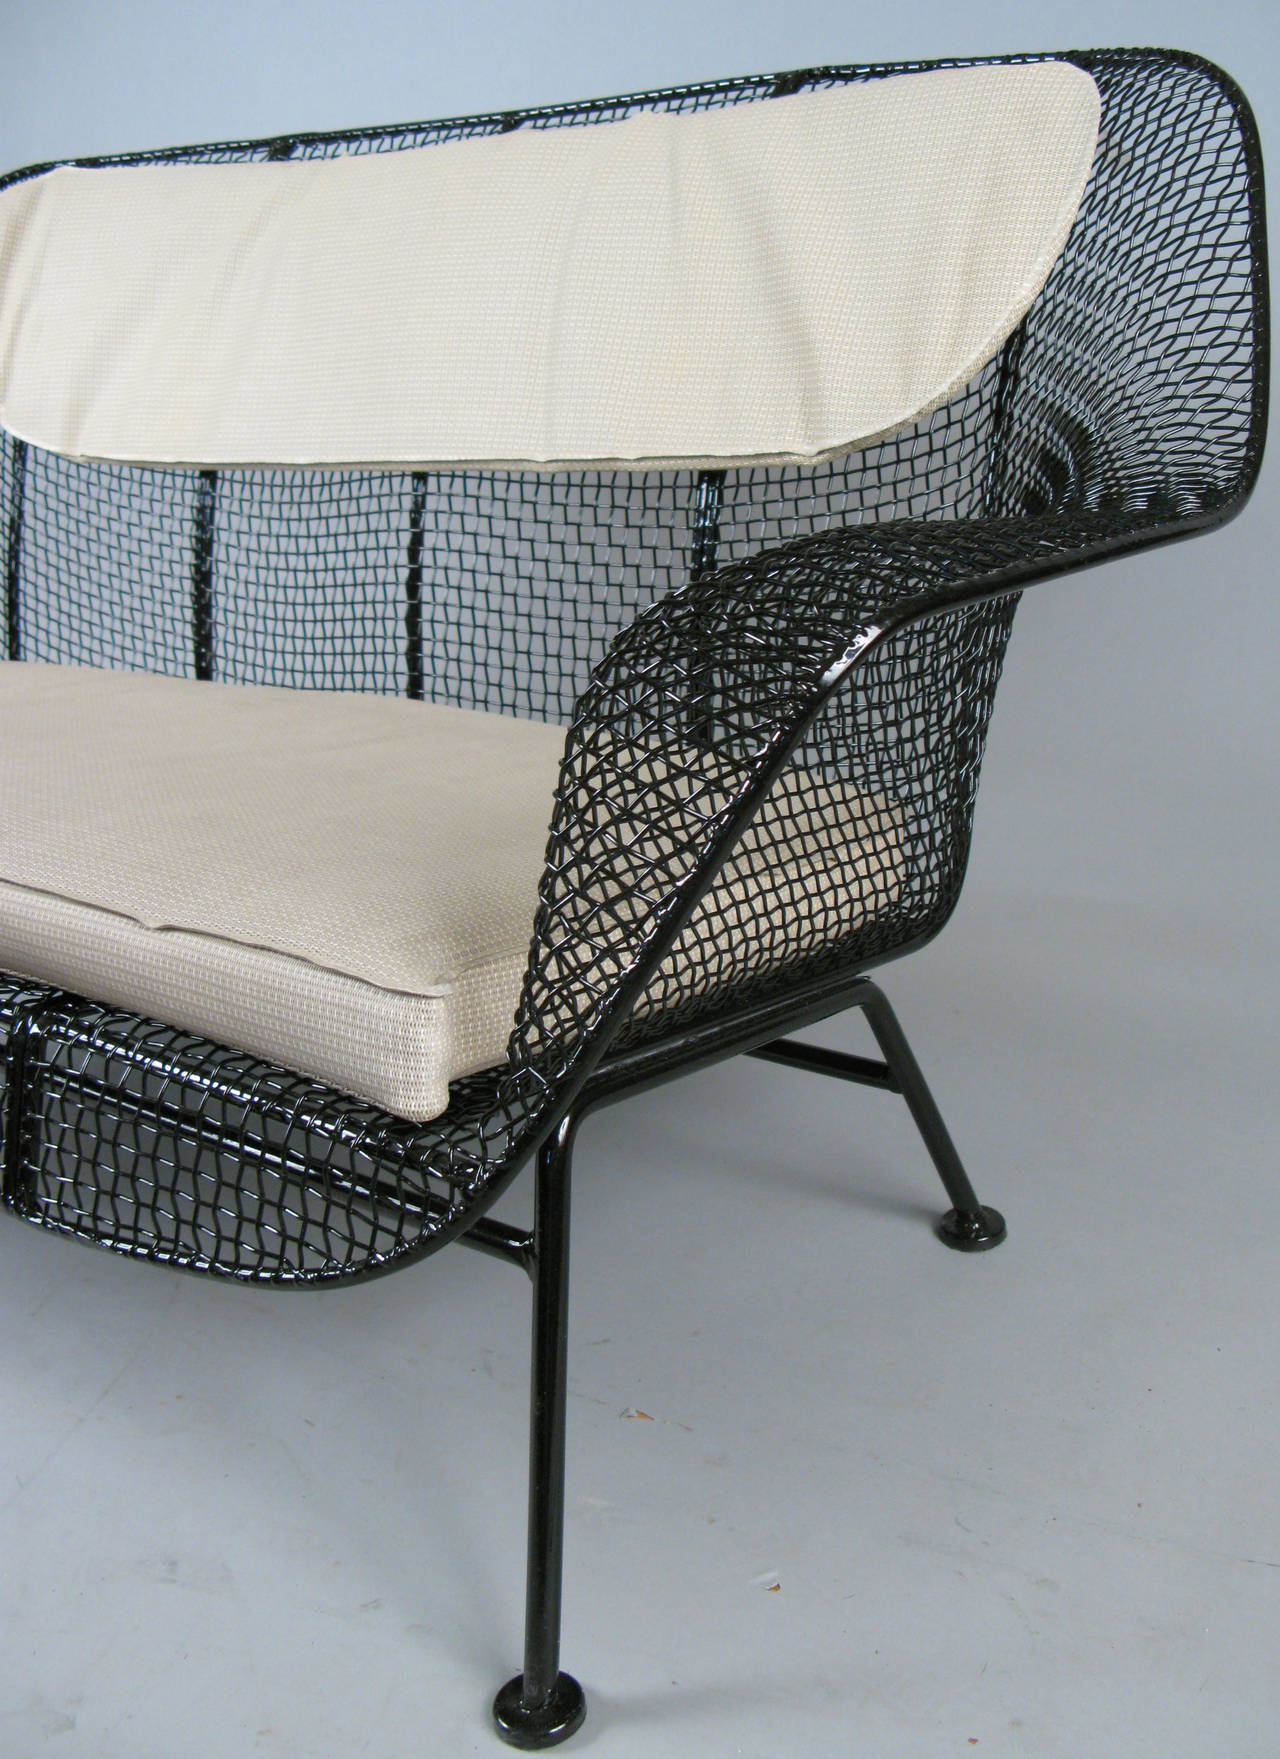 A vintage 1950s wrought iron and steel mesh settee from Russell Woodard's Classic and iconic Sculptura series. Beautiful and Classic sculptural design, finished in black. Cushions not included but can be custom ordered.

We also have Sculptura